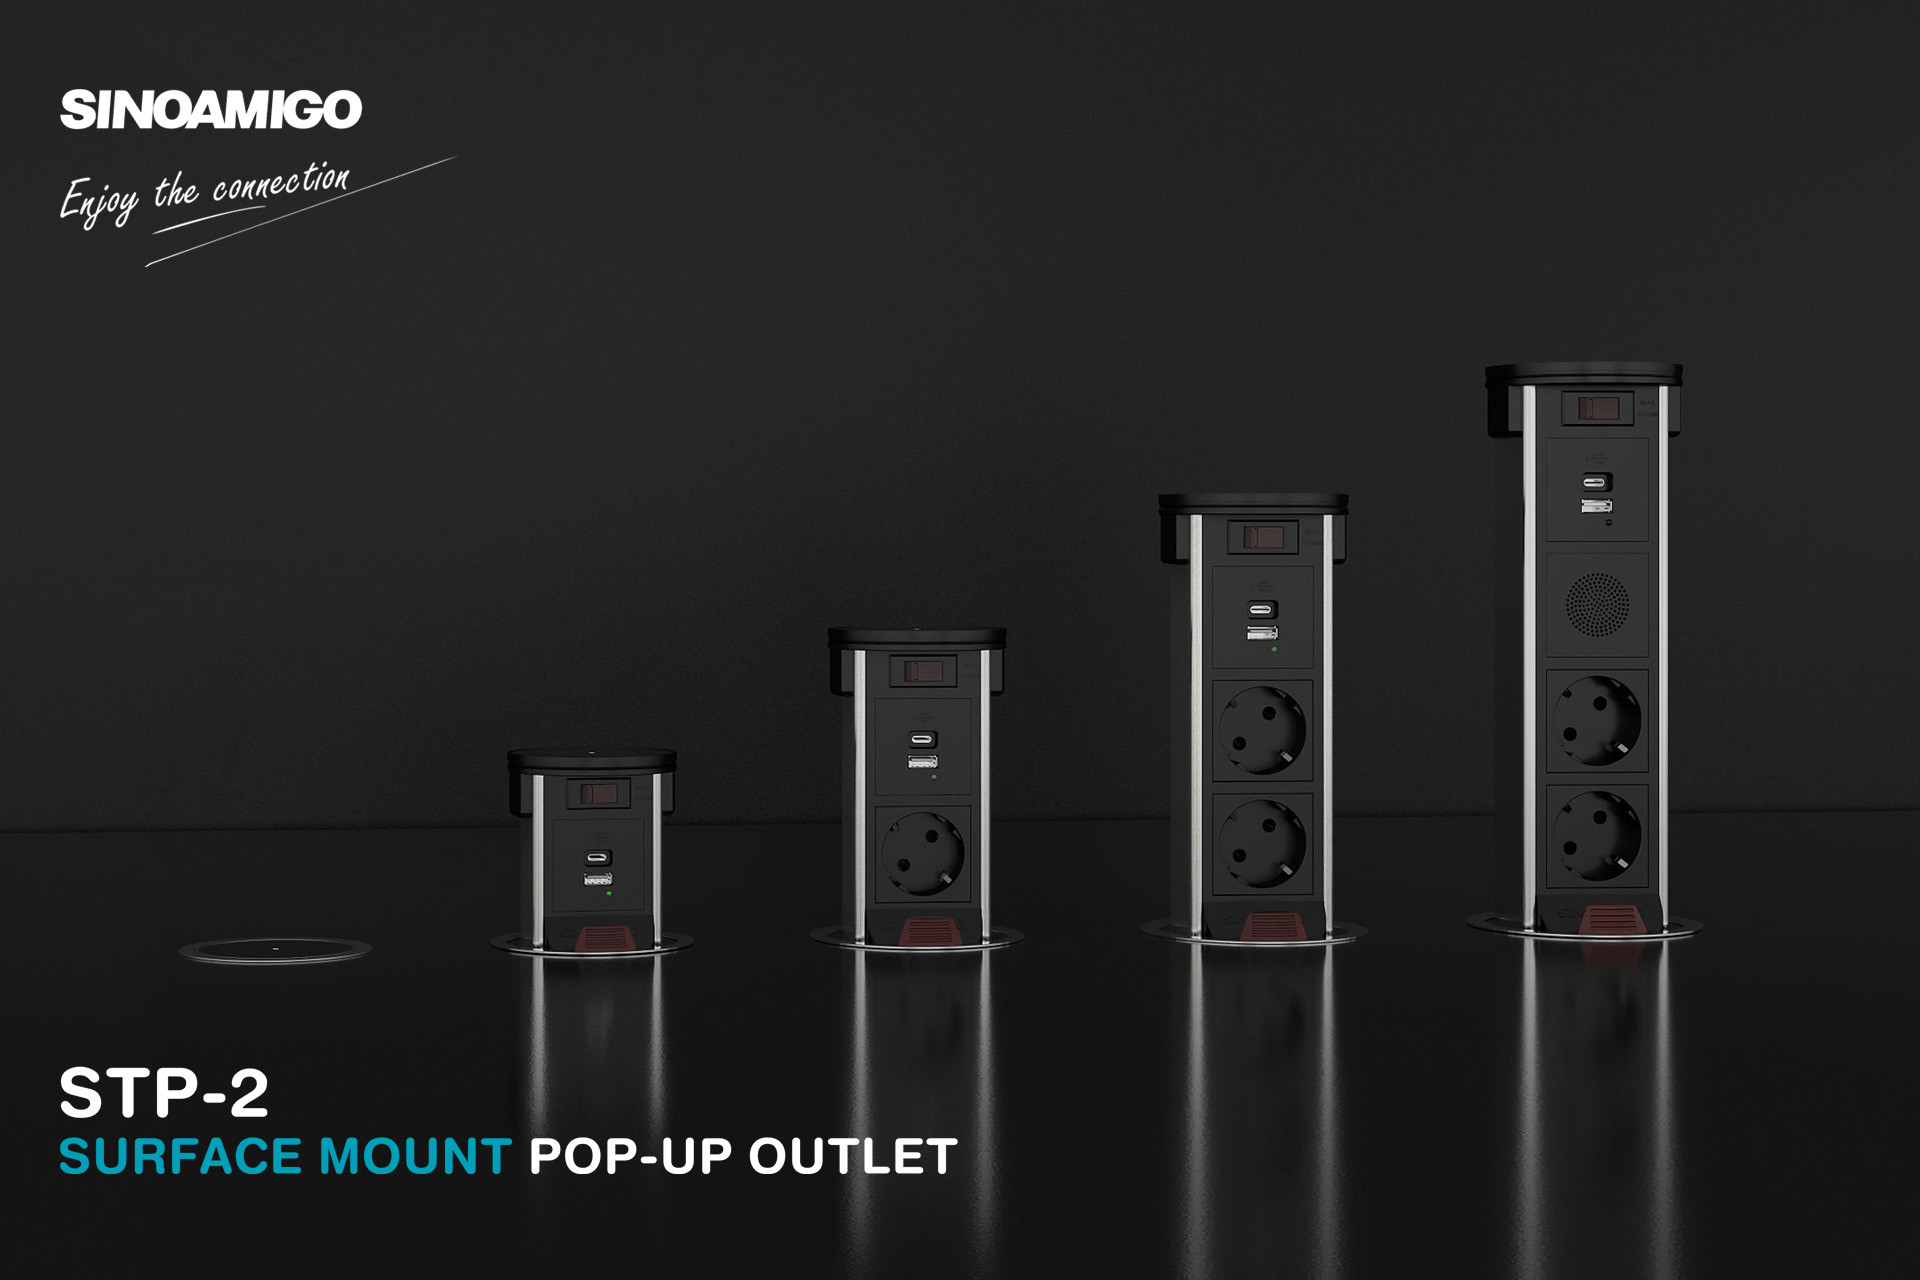 Introducing the next generation STP-2 Surface Mount Pop-up outlet: Redefining Innovation